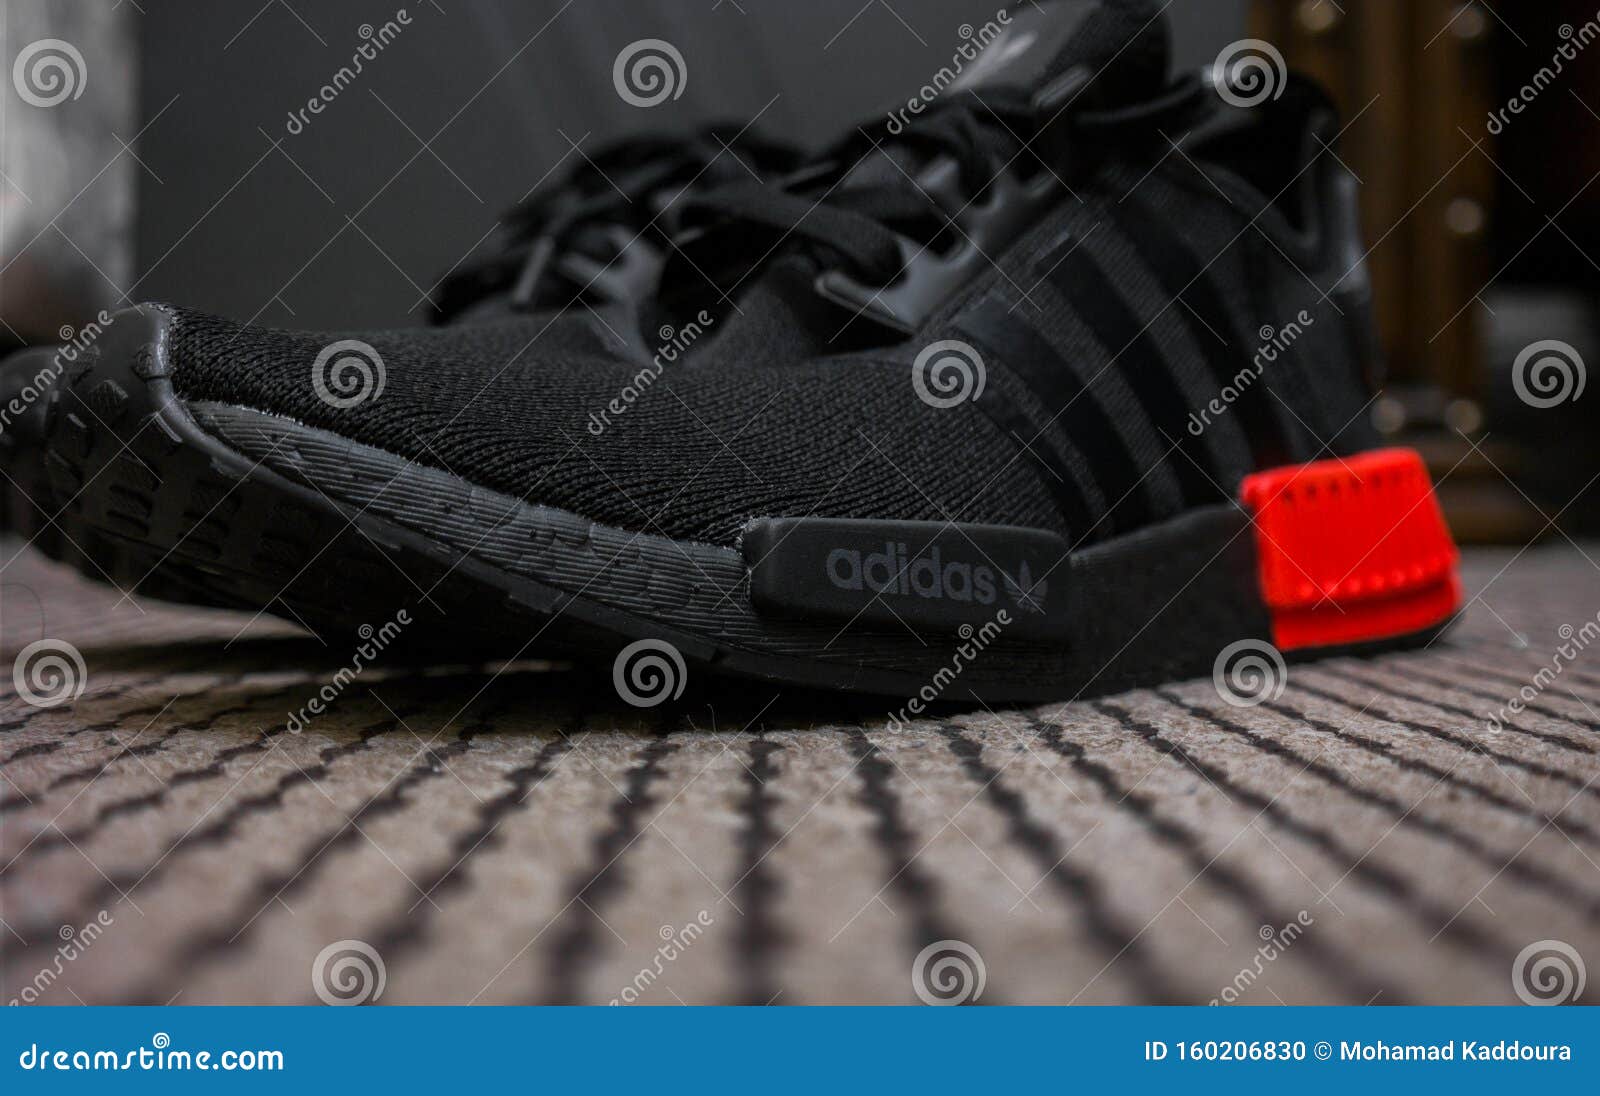 ADIDAS NMD Sneakers with ULTRA Technology in All Black with Red Accent - Sports Shoes Editorial Image - Image of germany, closeup: 160206830